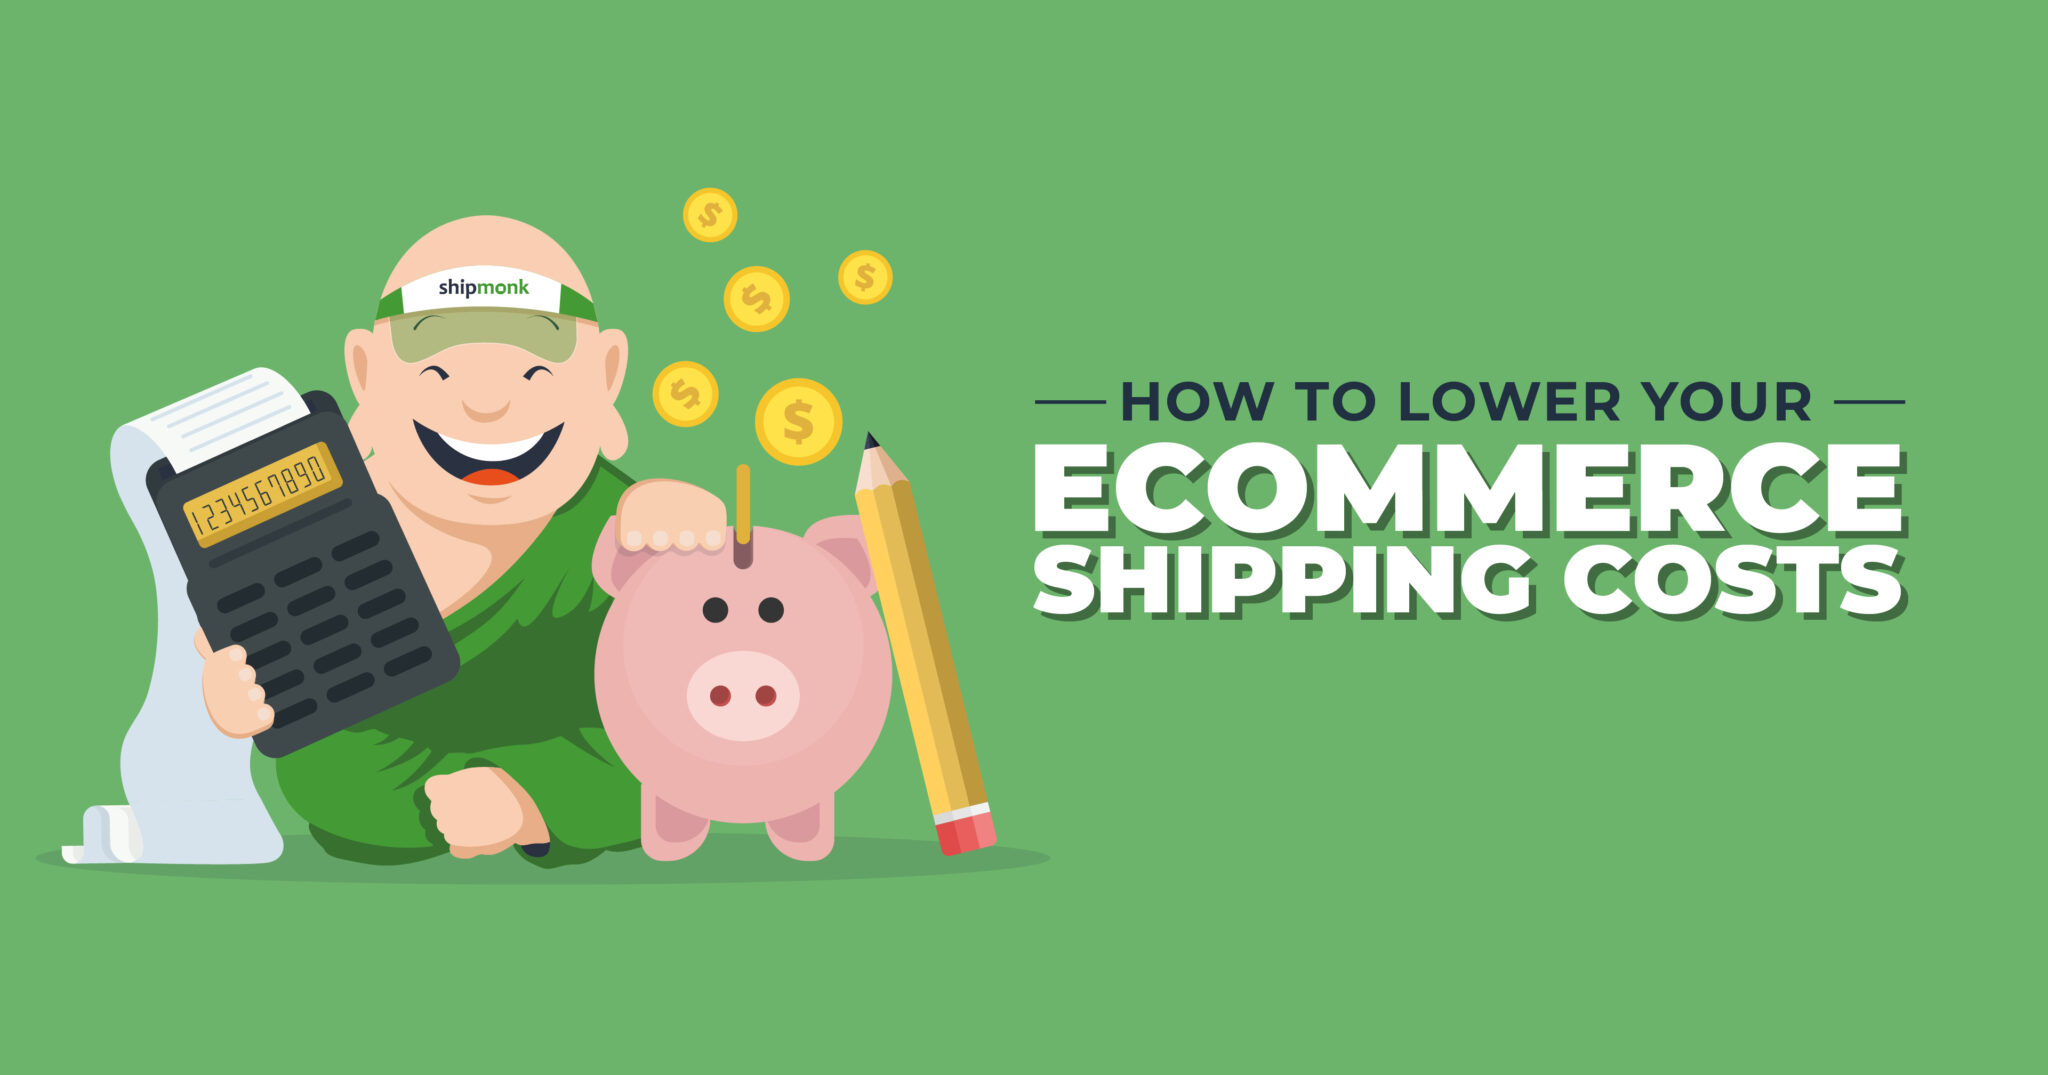 How to Lower Your Ecommerce Shipping Costs